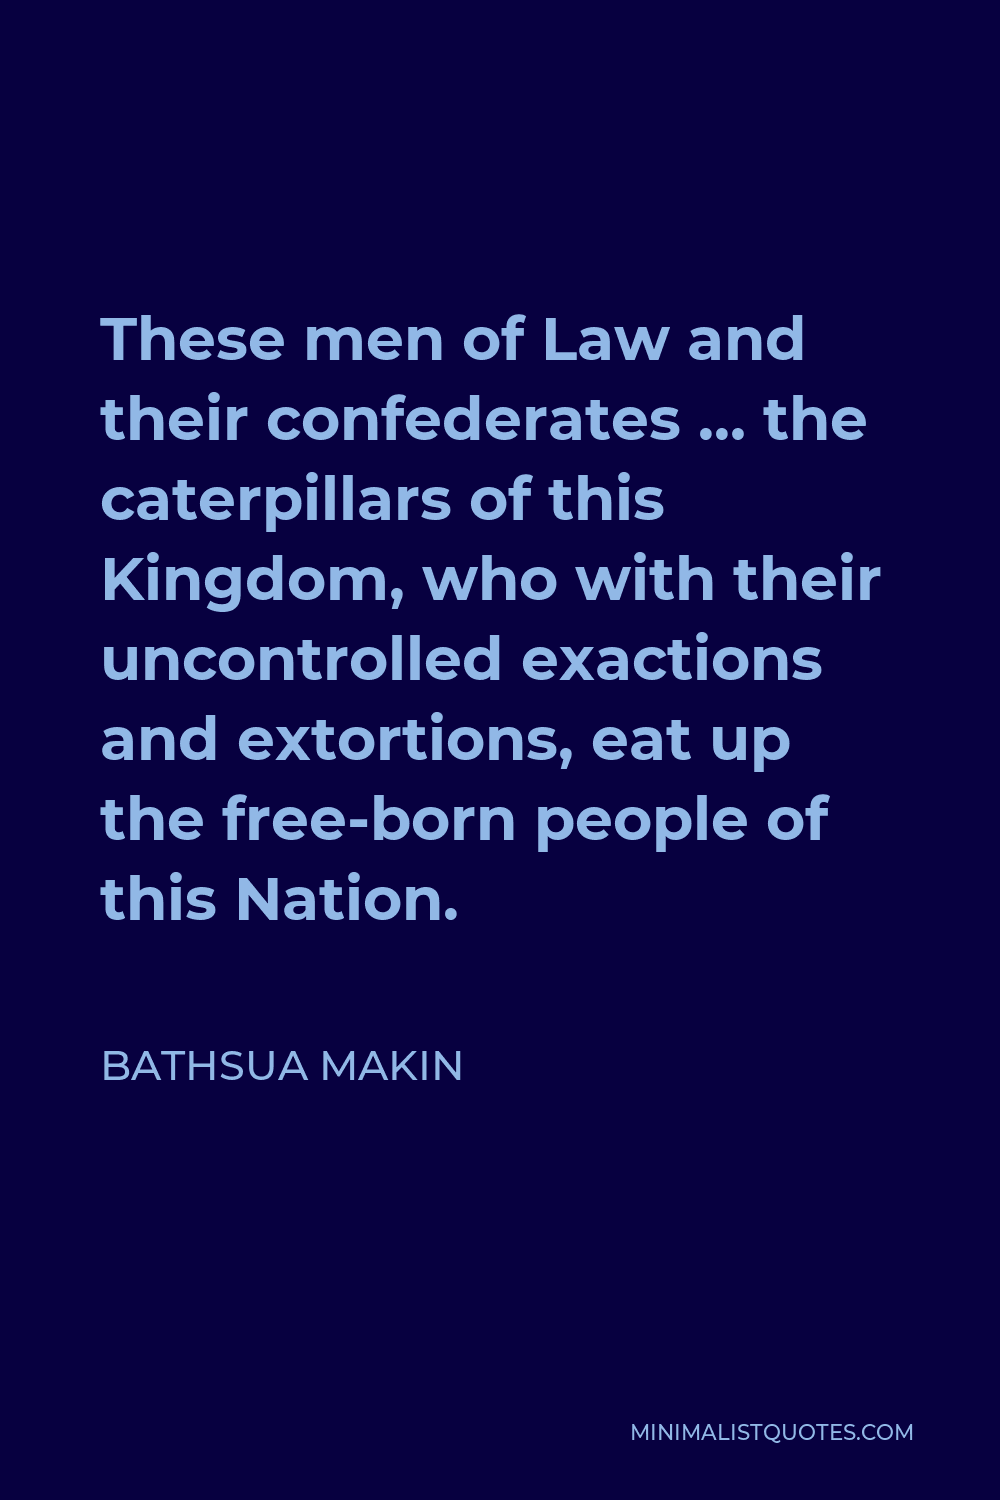 Bathsua Makin Quote - These men of Law and their confederates … the caterpillars of this Kingdom, who with their uncontrolled exactions and extortions, eat up the free-born people of this Nation.